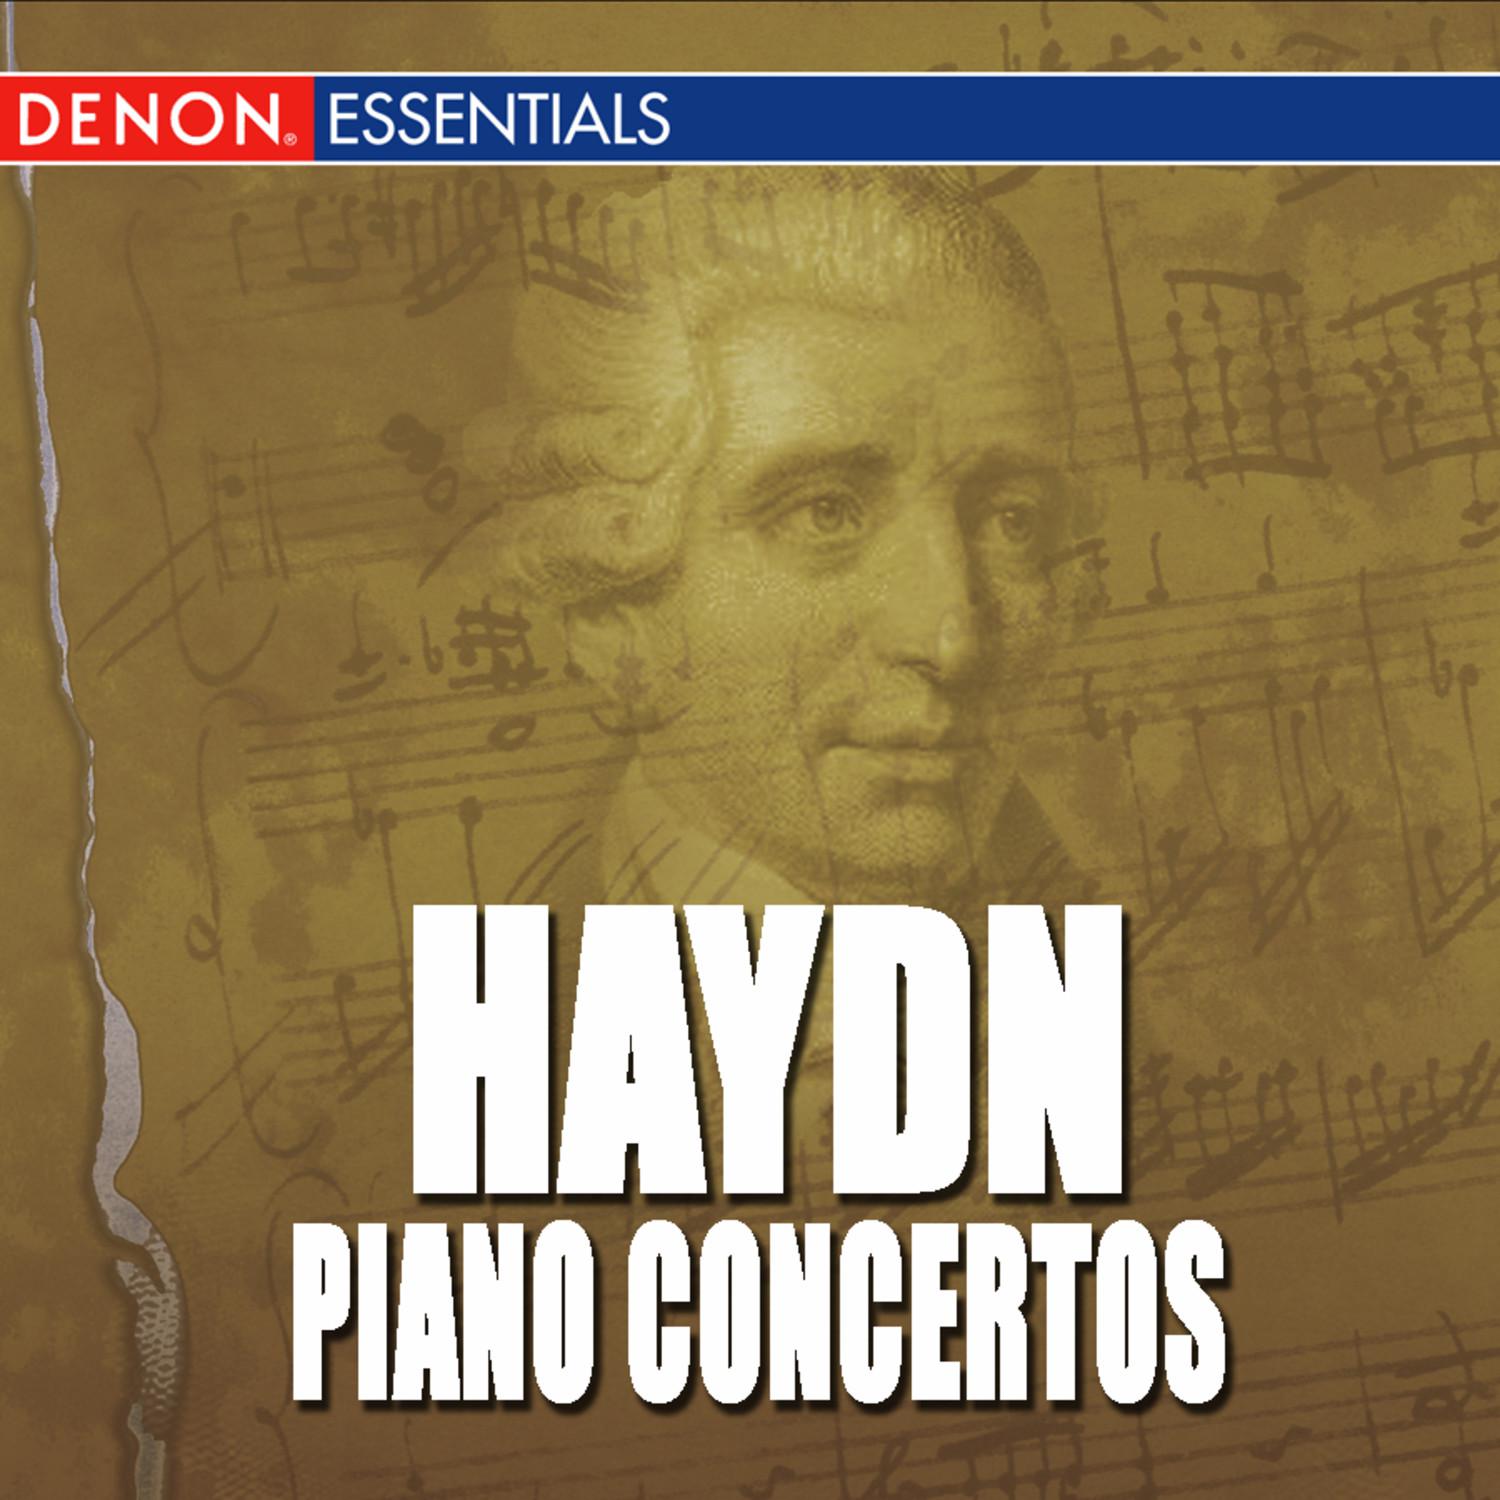 Concerto for Piano and Orchestra in D Major